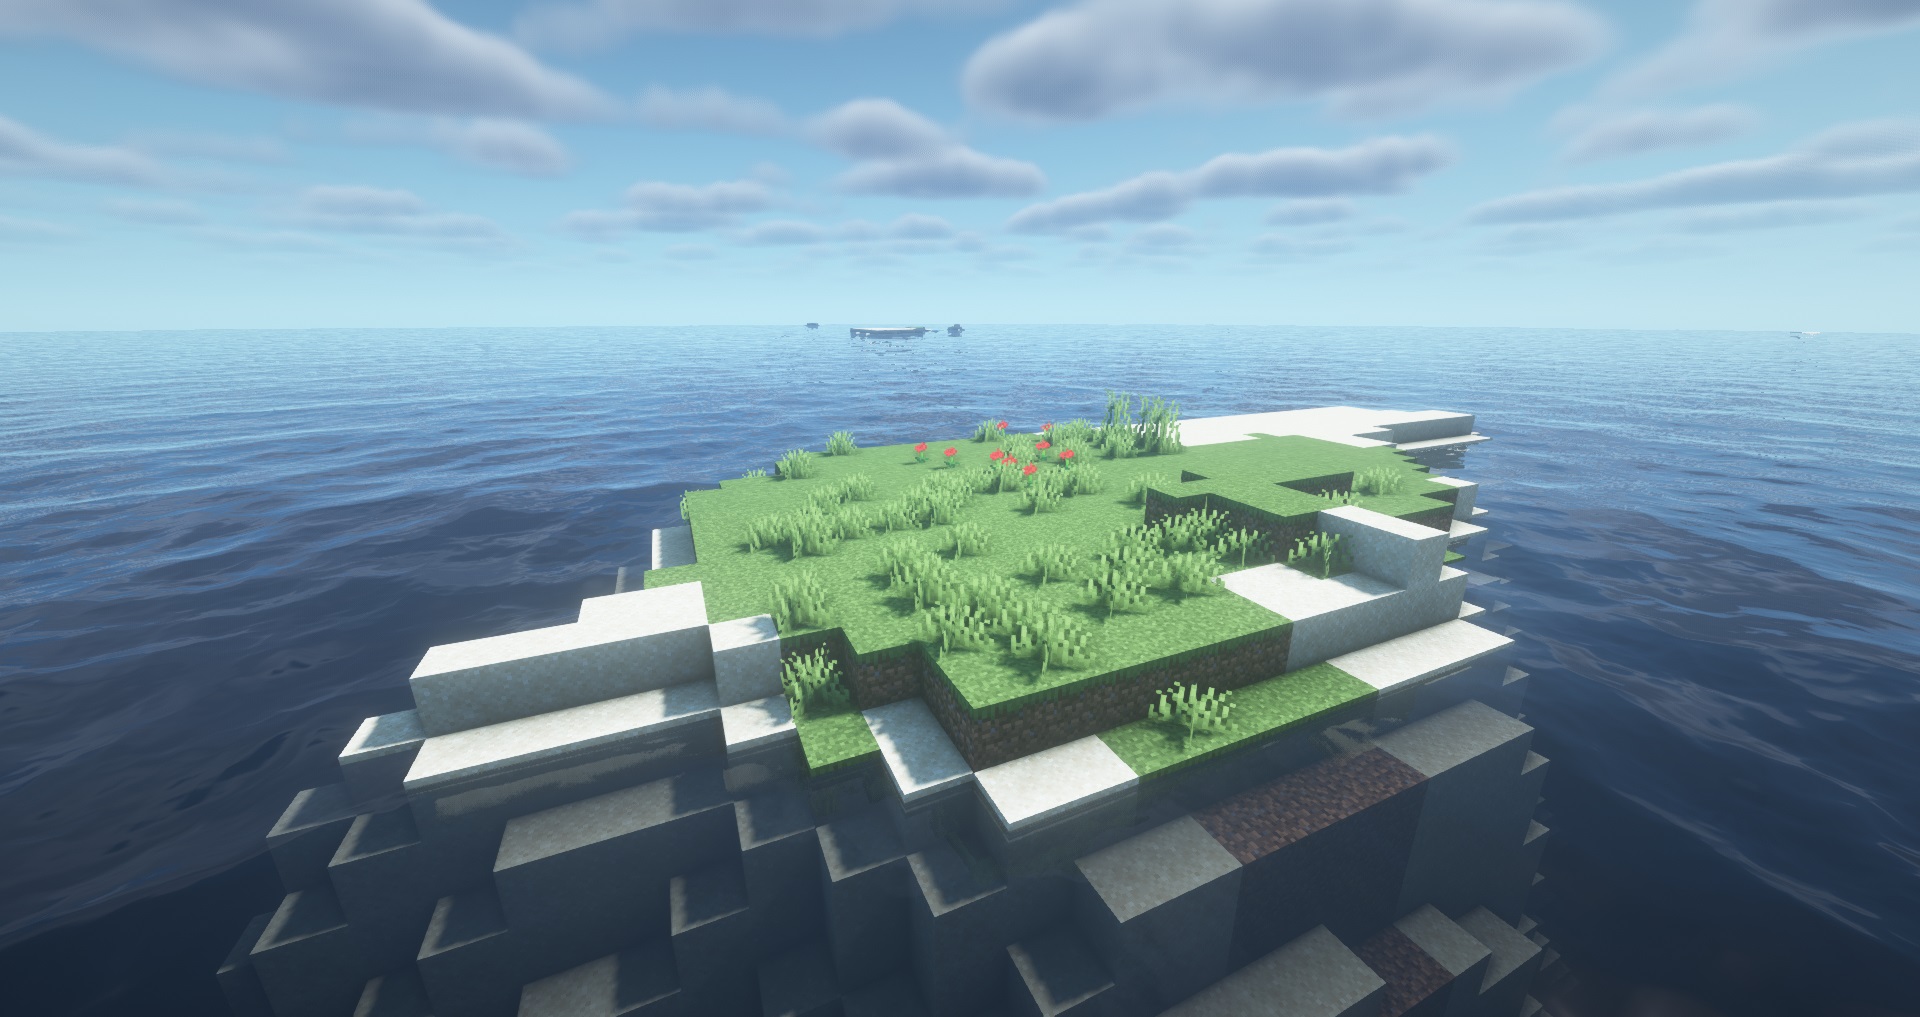 Minecraft seeds - Minimalist survival island - A very tiny island with only grass, dirt, and sand blocks, surrounded by ocean nearly as far as the eye can see.